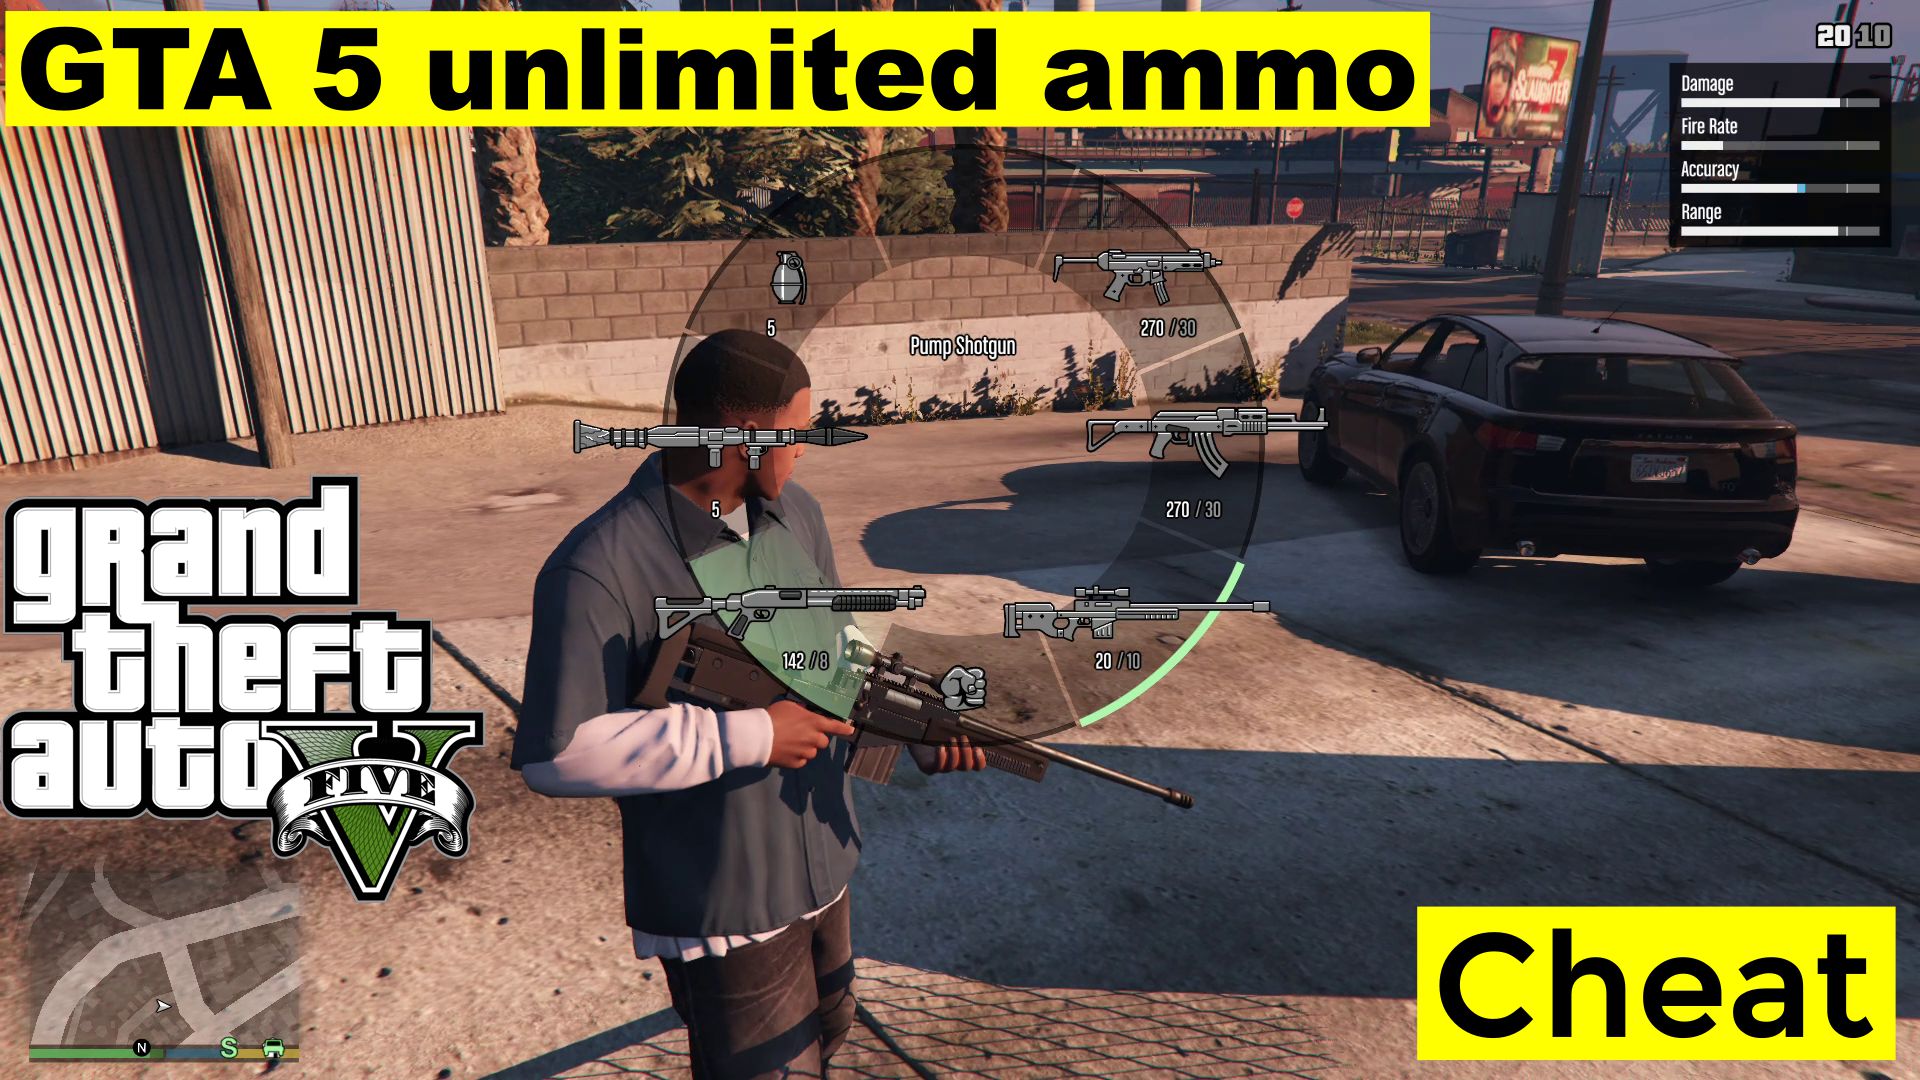 GTA 5 unlimited ammo cheat for PC, Xbox, Playstation